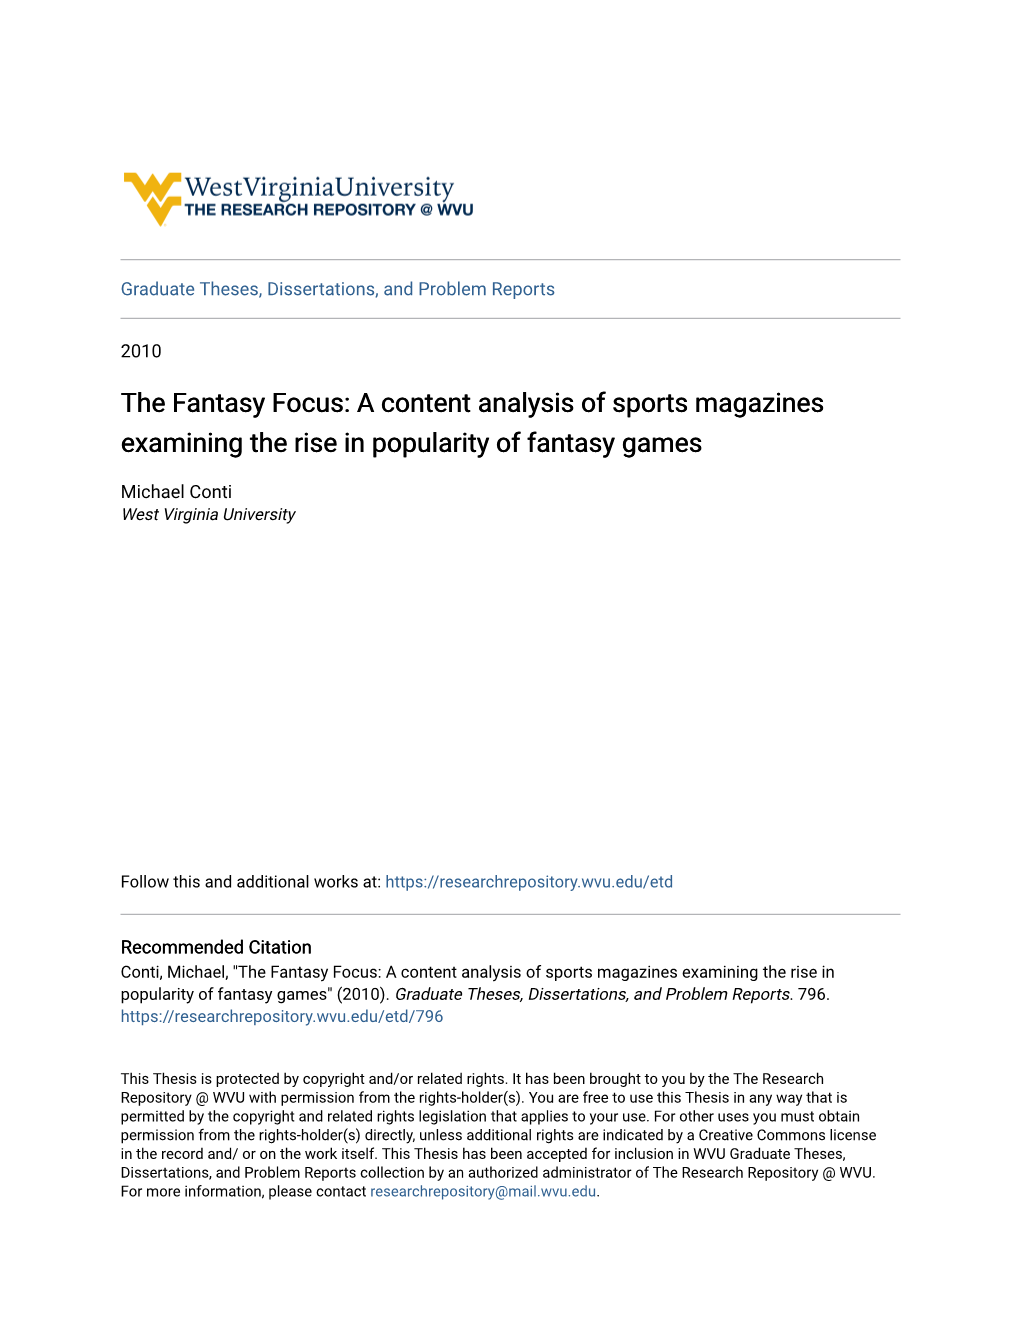 A Content Analysis of Sports Magazines Examining the Rise in Popularity of Fantasy Games